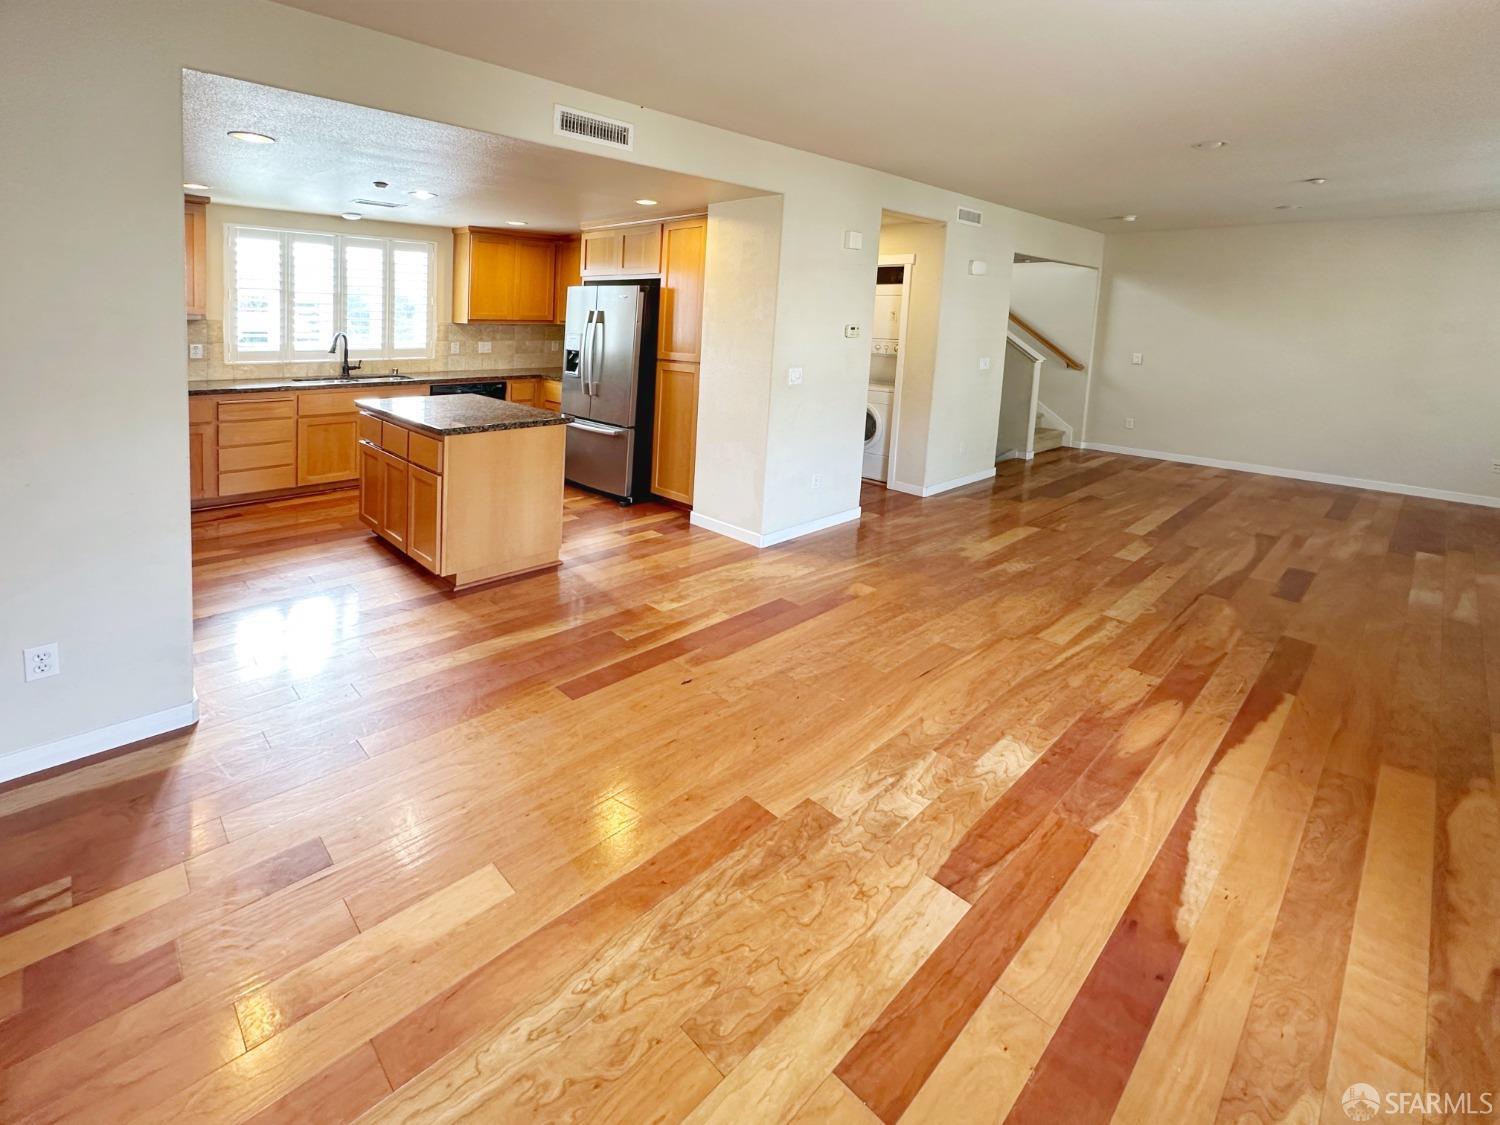 a view of a kitchen with wooden floor